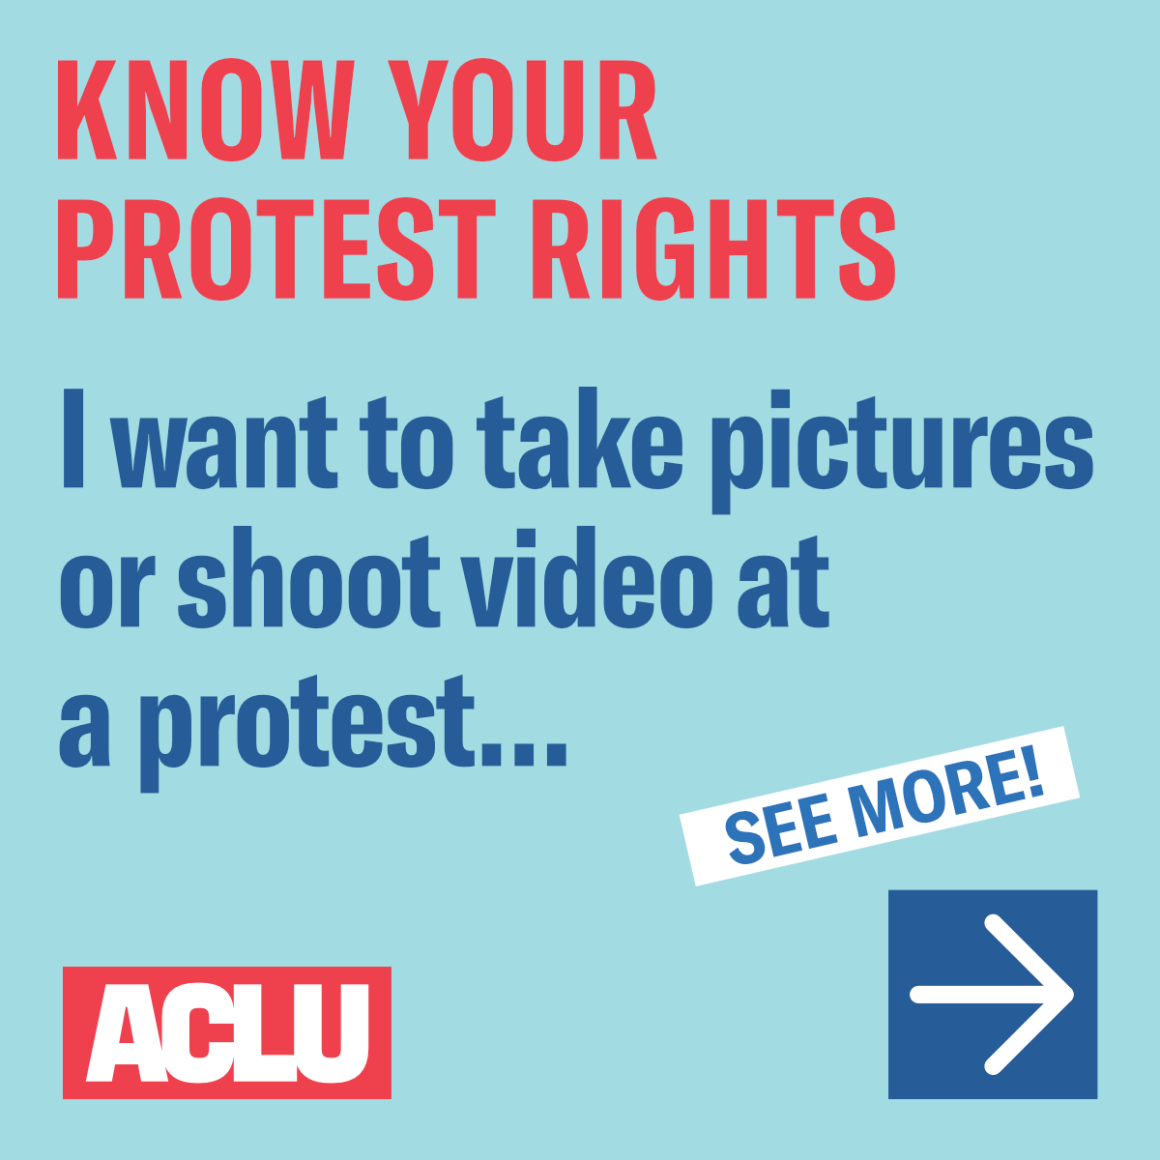 I want to take pictures or shoot video at a protest